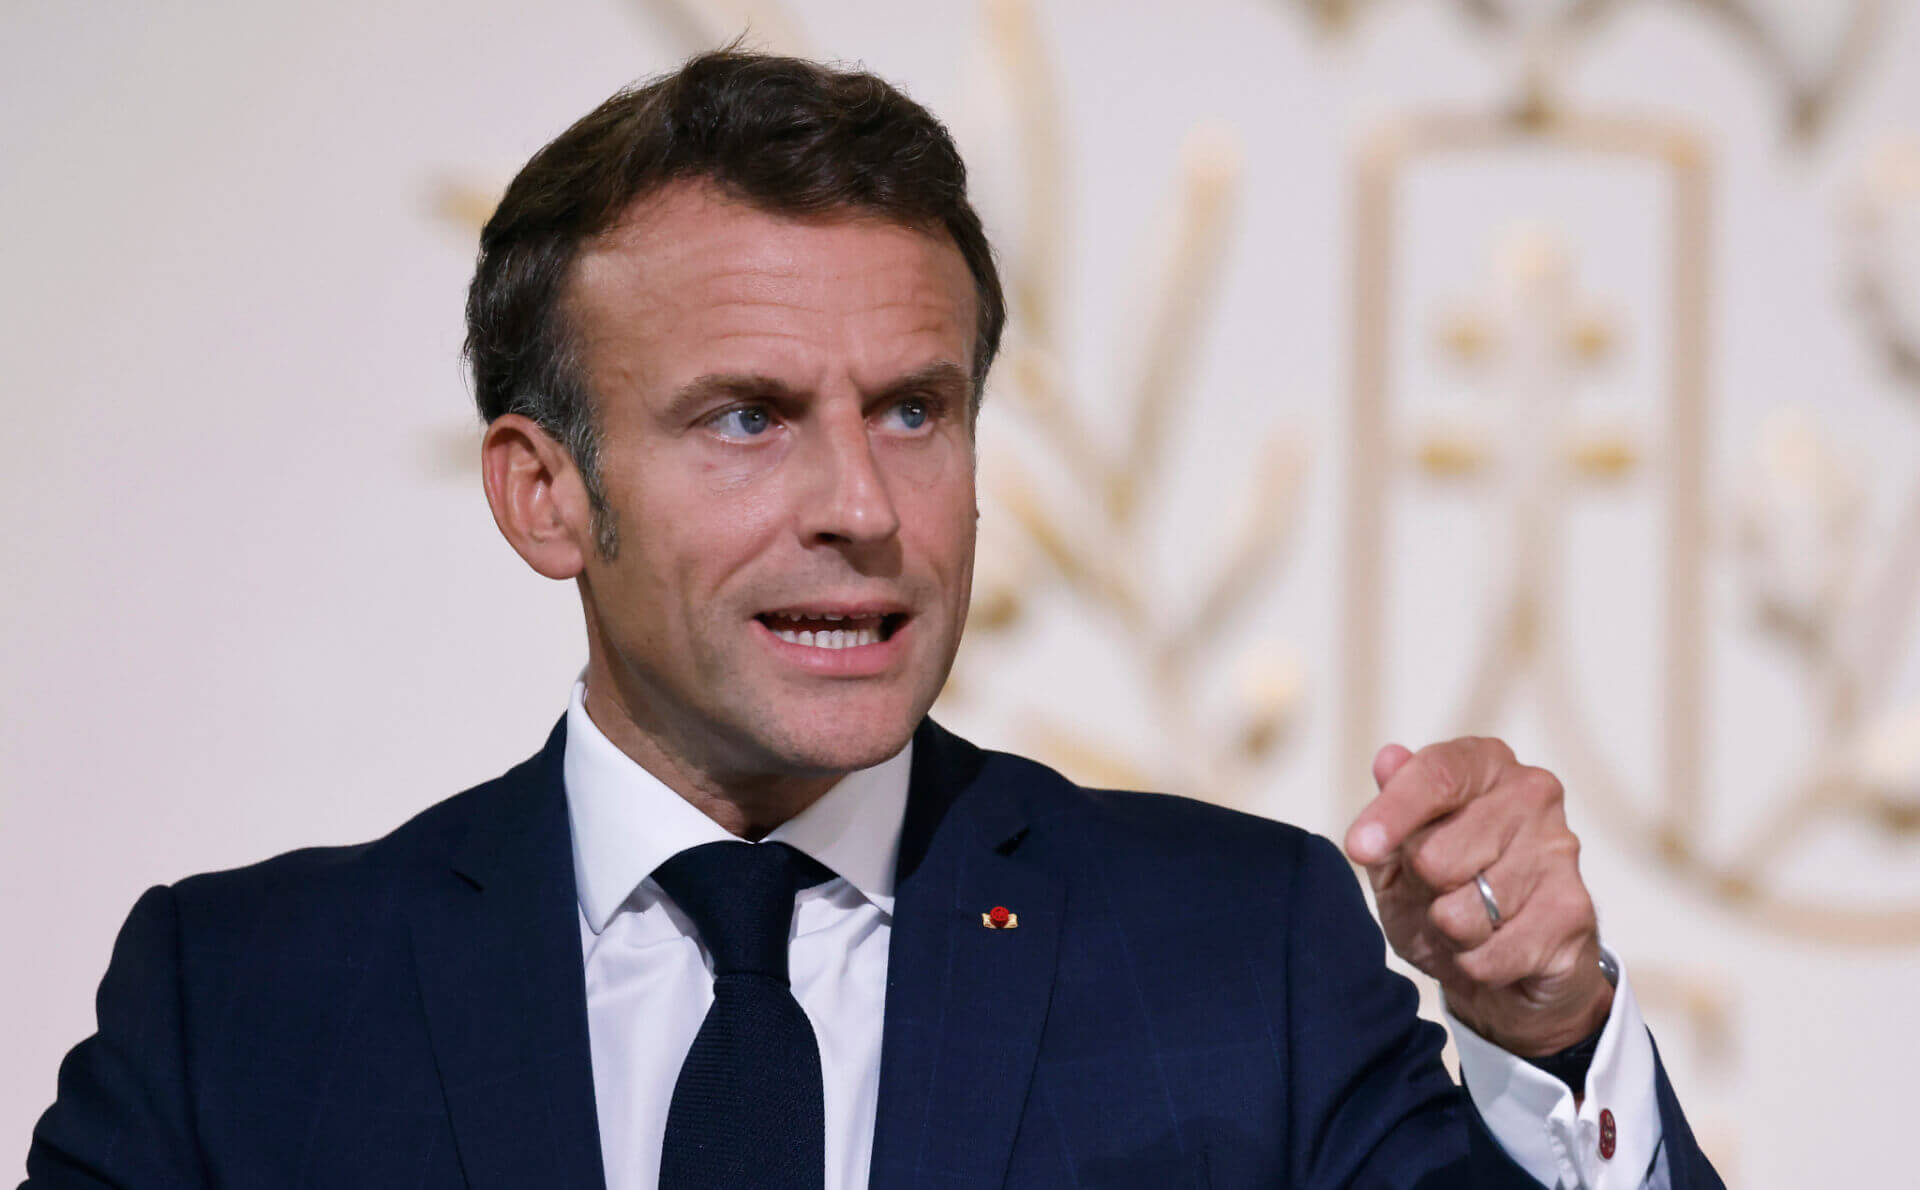 Modi Right in Saying Now Not the Time for War: French Pres. Macron on Ukraine Crisis